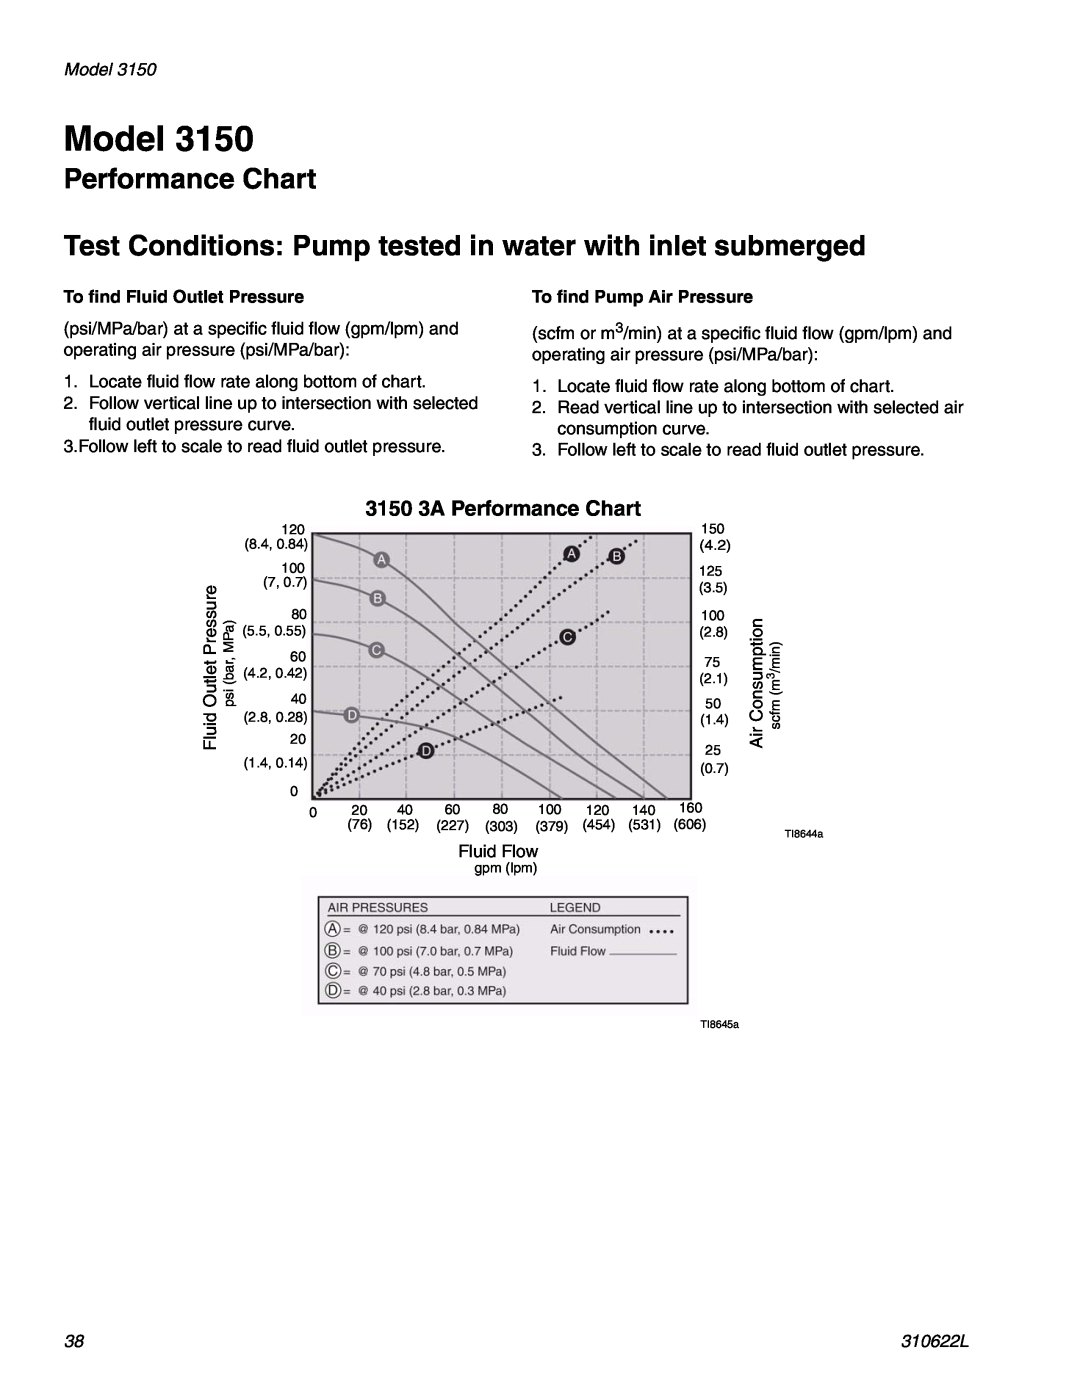 Haier 1590 SA 3150 3A Performance Chart, Model, Test Conditions Pump tested in water with inlet submerged, 310622L 